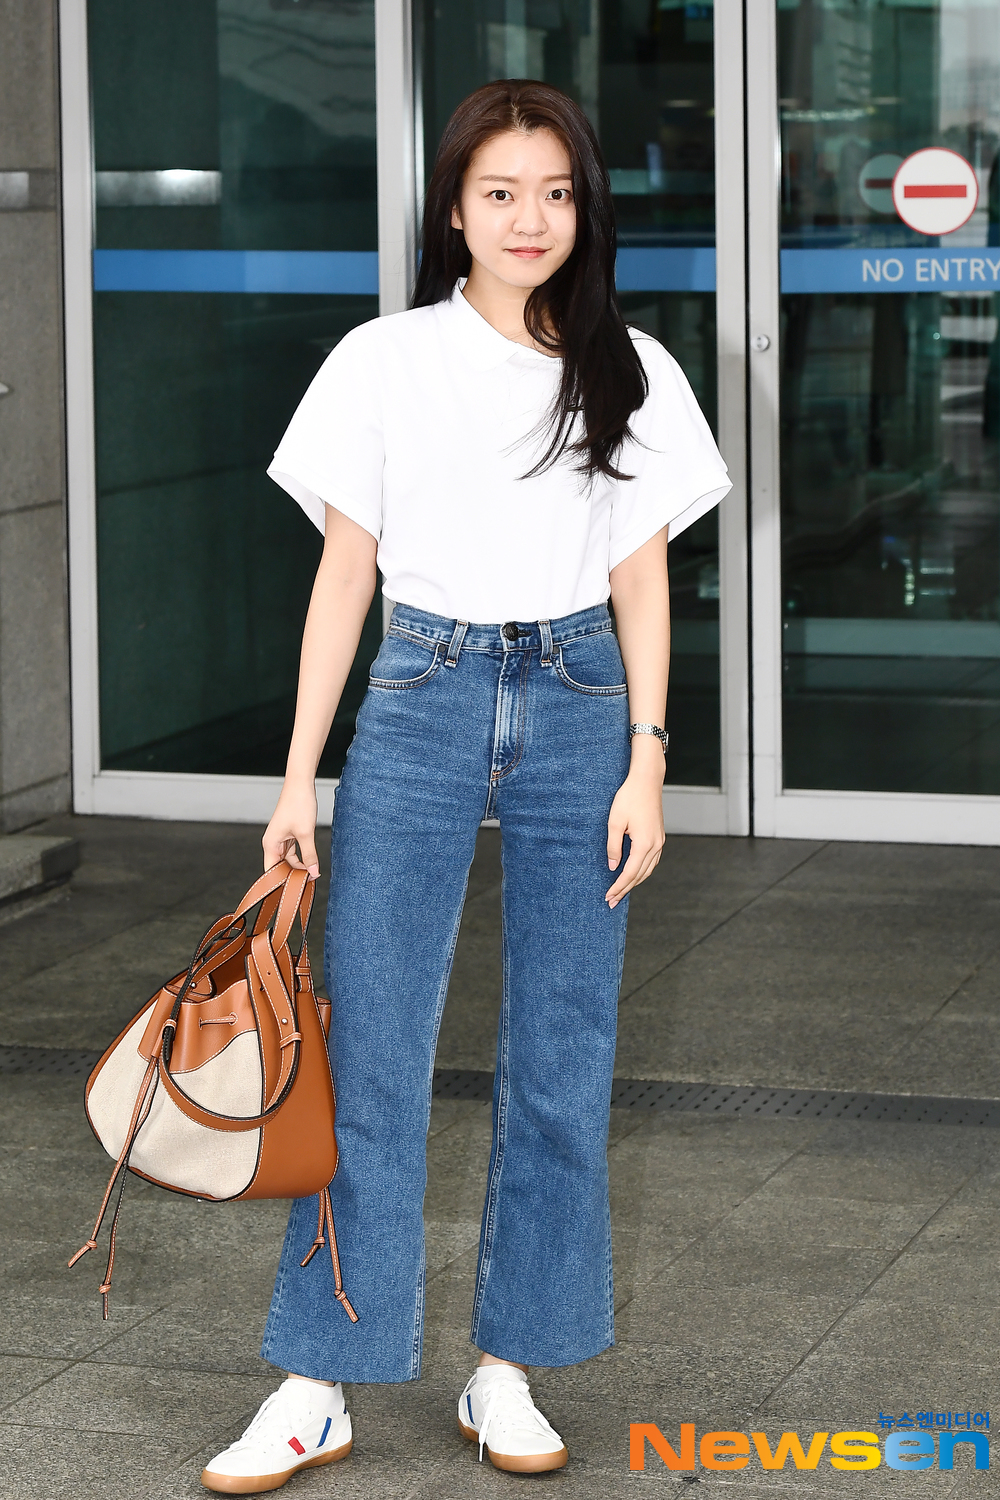 Actor Go Ah-sung left for the magazine photo shoot Vietnam Pukuok on April 26 at the Incheon International Airport in Unseo-dong, Jung-gu, Incheon.Actor Go Ah-sung is leaving for Vietnam Pukuok with an airport fashion.exponential earthquake